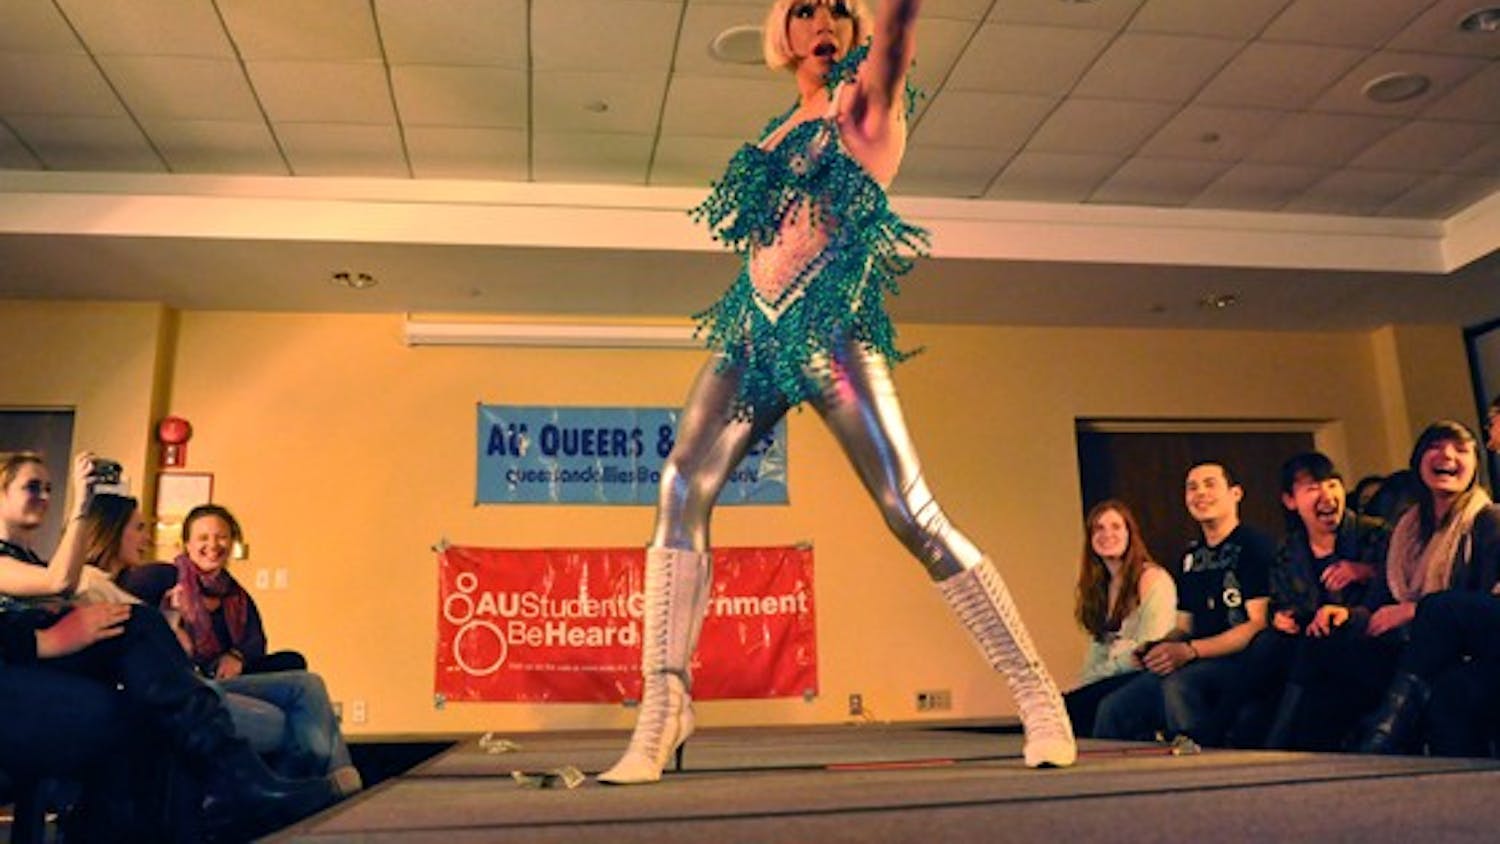 STRIKE A POSE â€” The glittering Athena Ducockis struts her stuff on the catwalk at the annual drag show, which took place on Monday night in the University Club. The AU Student Government and Queers and Allies put on the show to raise money for HIV healthcare.